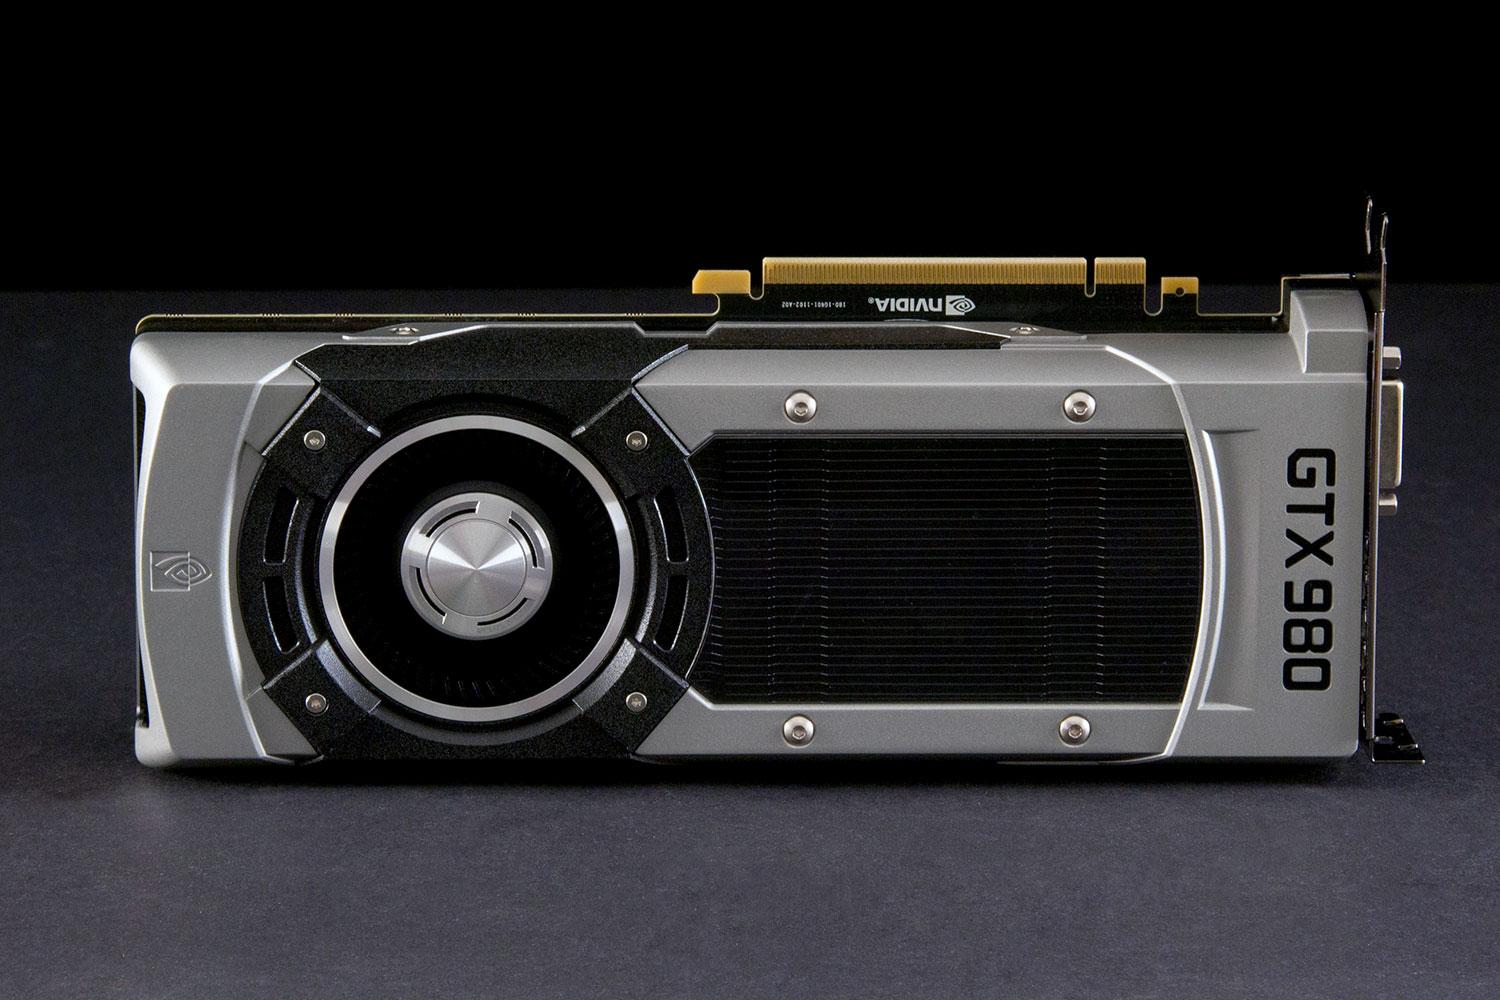 nvidia geforce gtx 980 review gtx980 front full